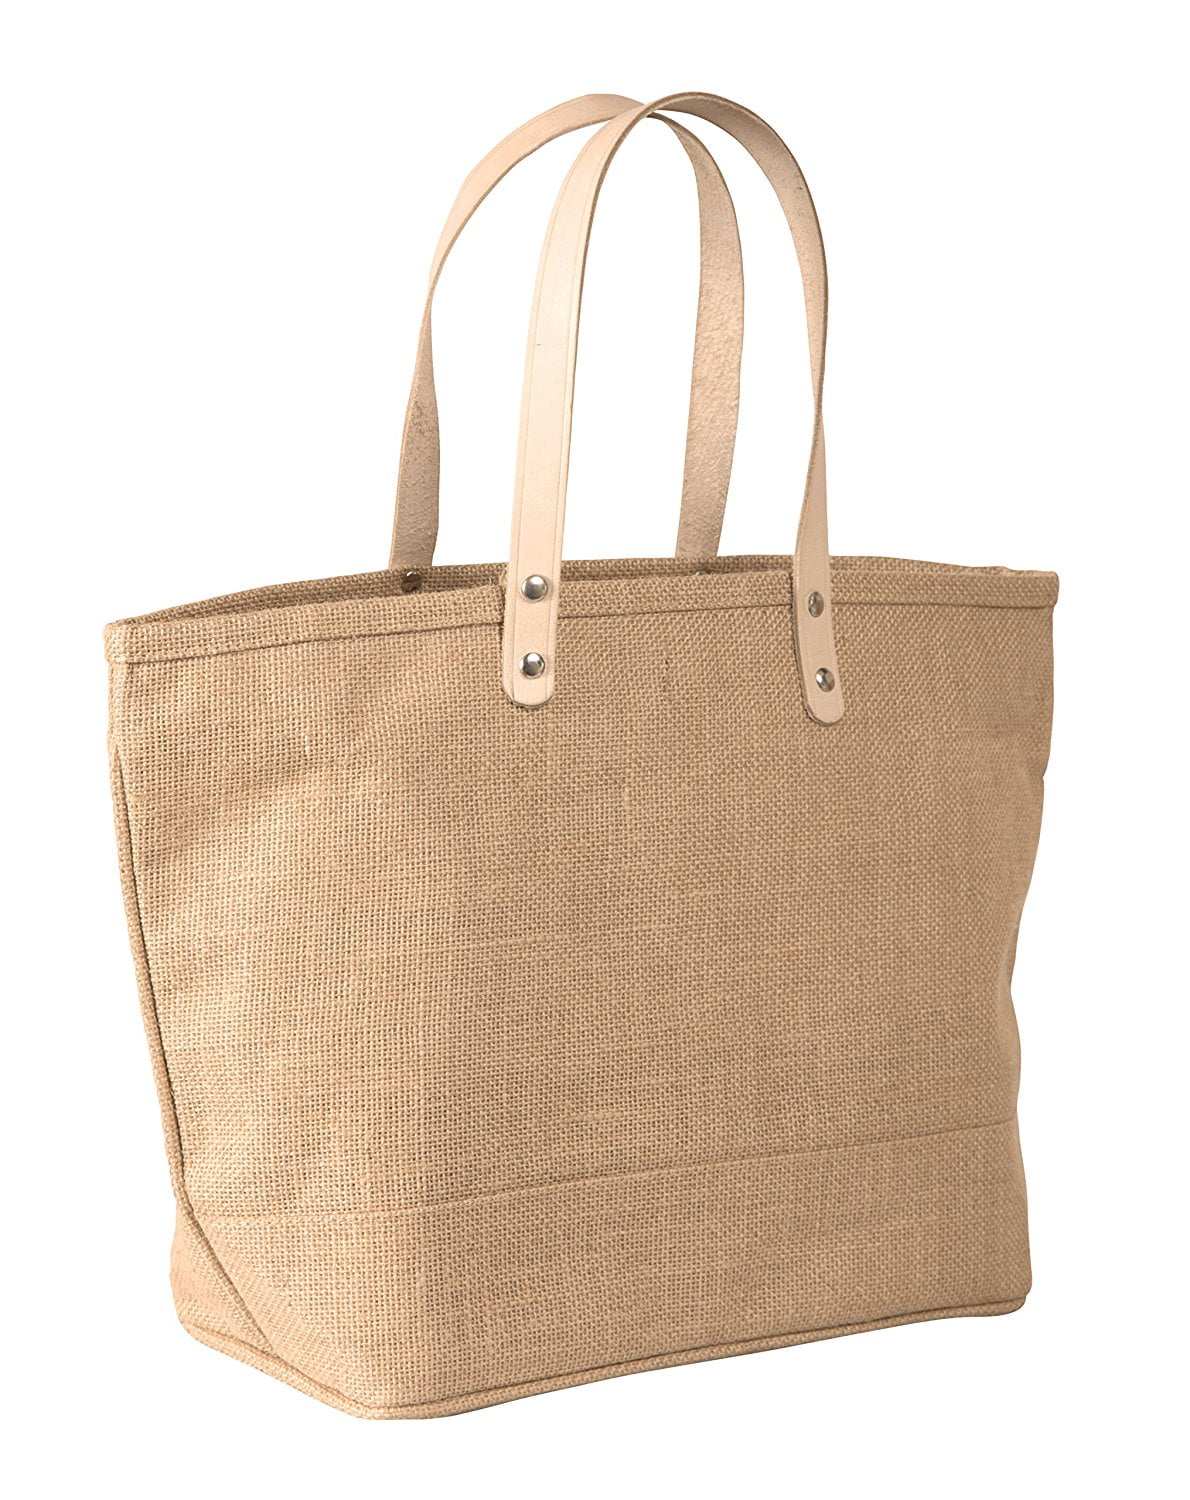 Carrygreen - Small Jute Tote bag with Leather Handles Size 17.25&quot;W x 10.5&quot;H x 5.5&quot; Gusset in ...